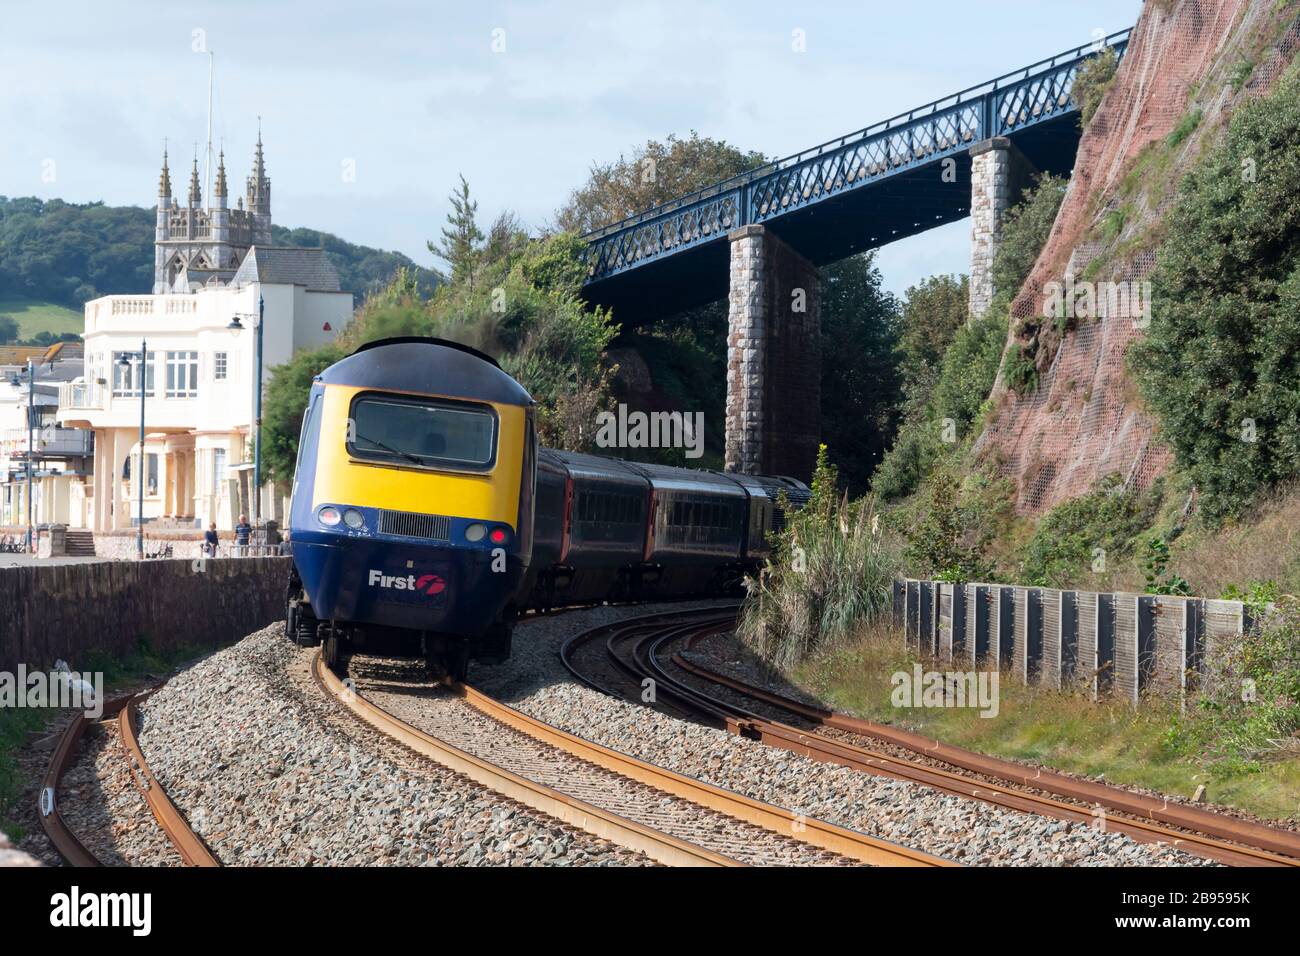 First Great Western British Rail Class 43 HST InterCity 125 High Speed Train on the waterfront at Teignmouth, Devon, England Stock Photo